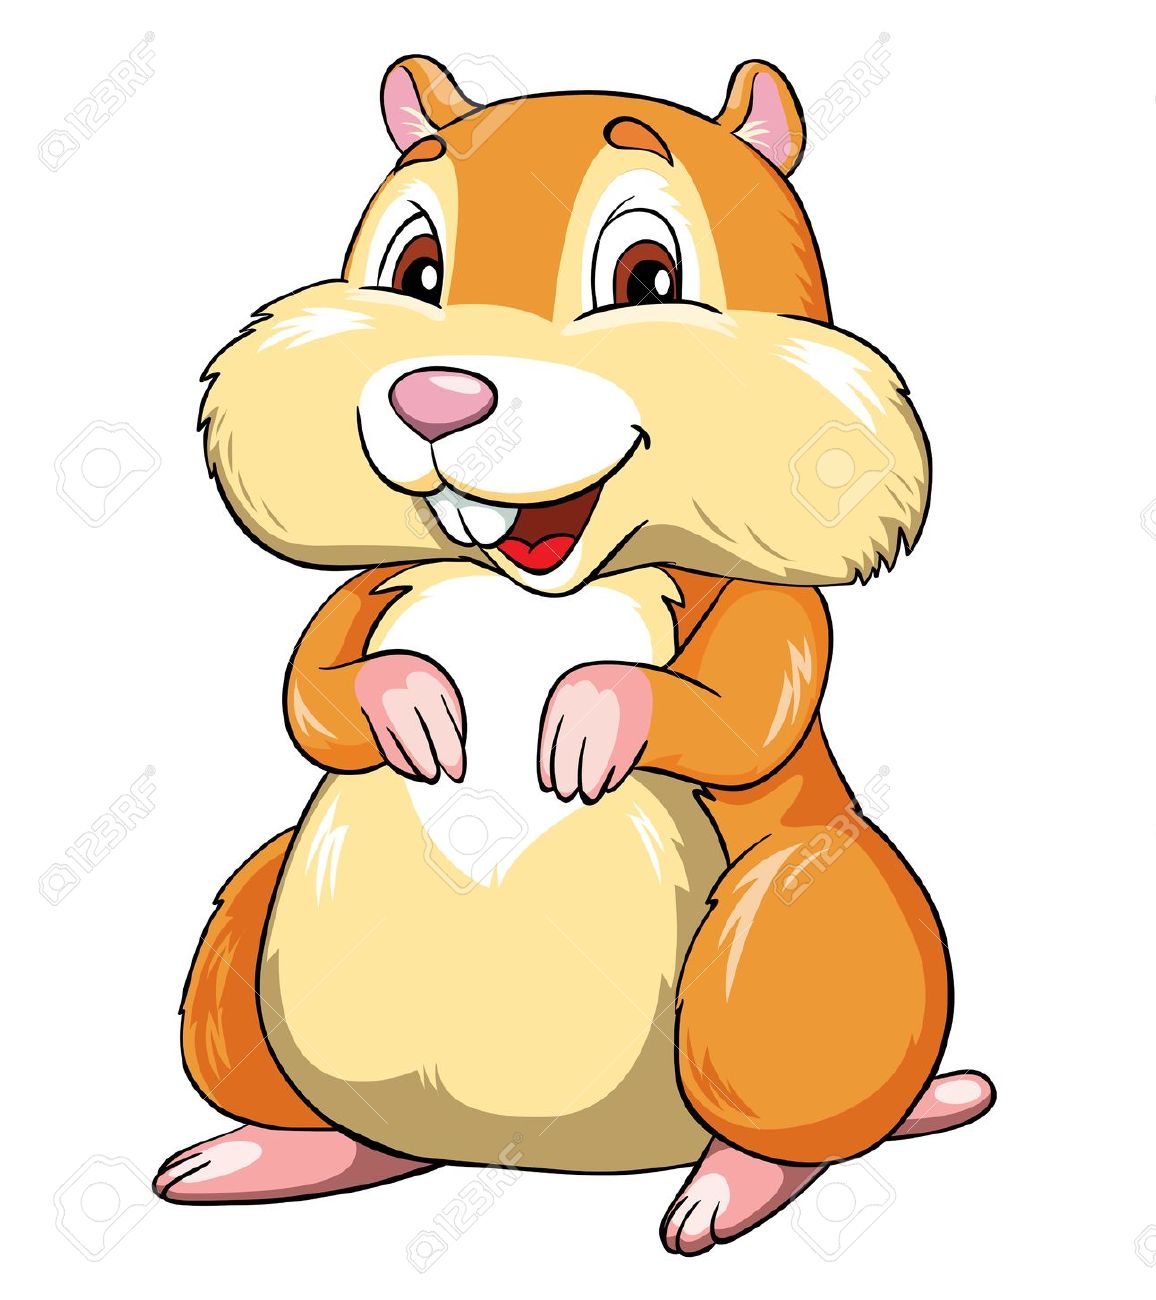 Hamster clipart #12, Download drawings